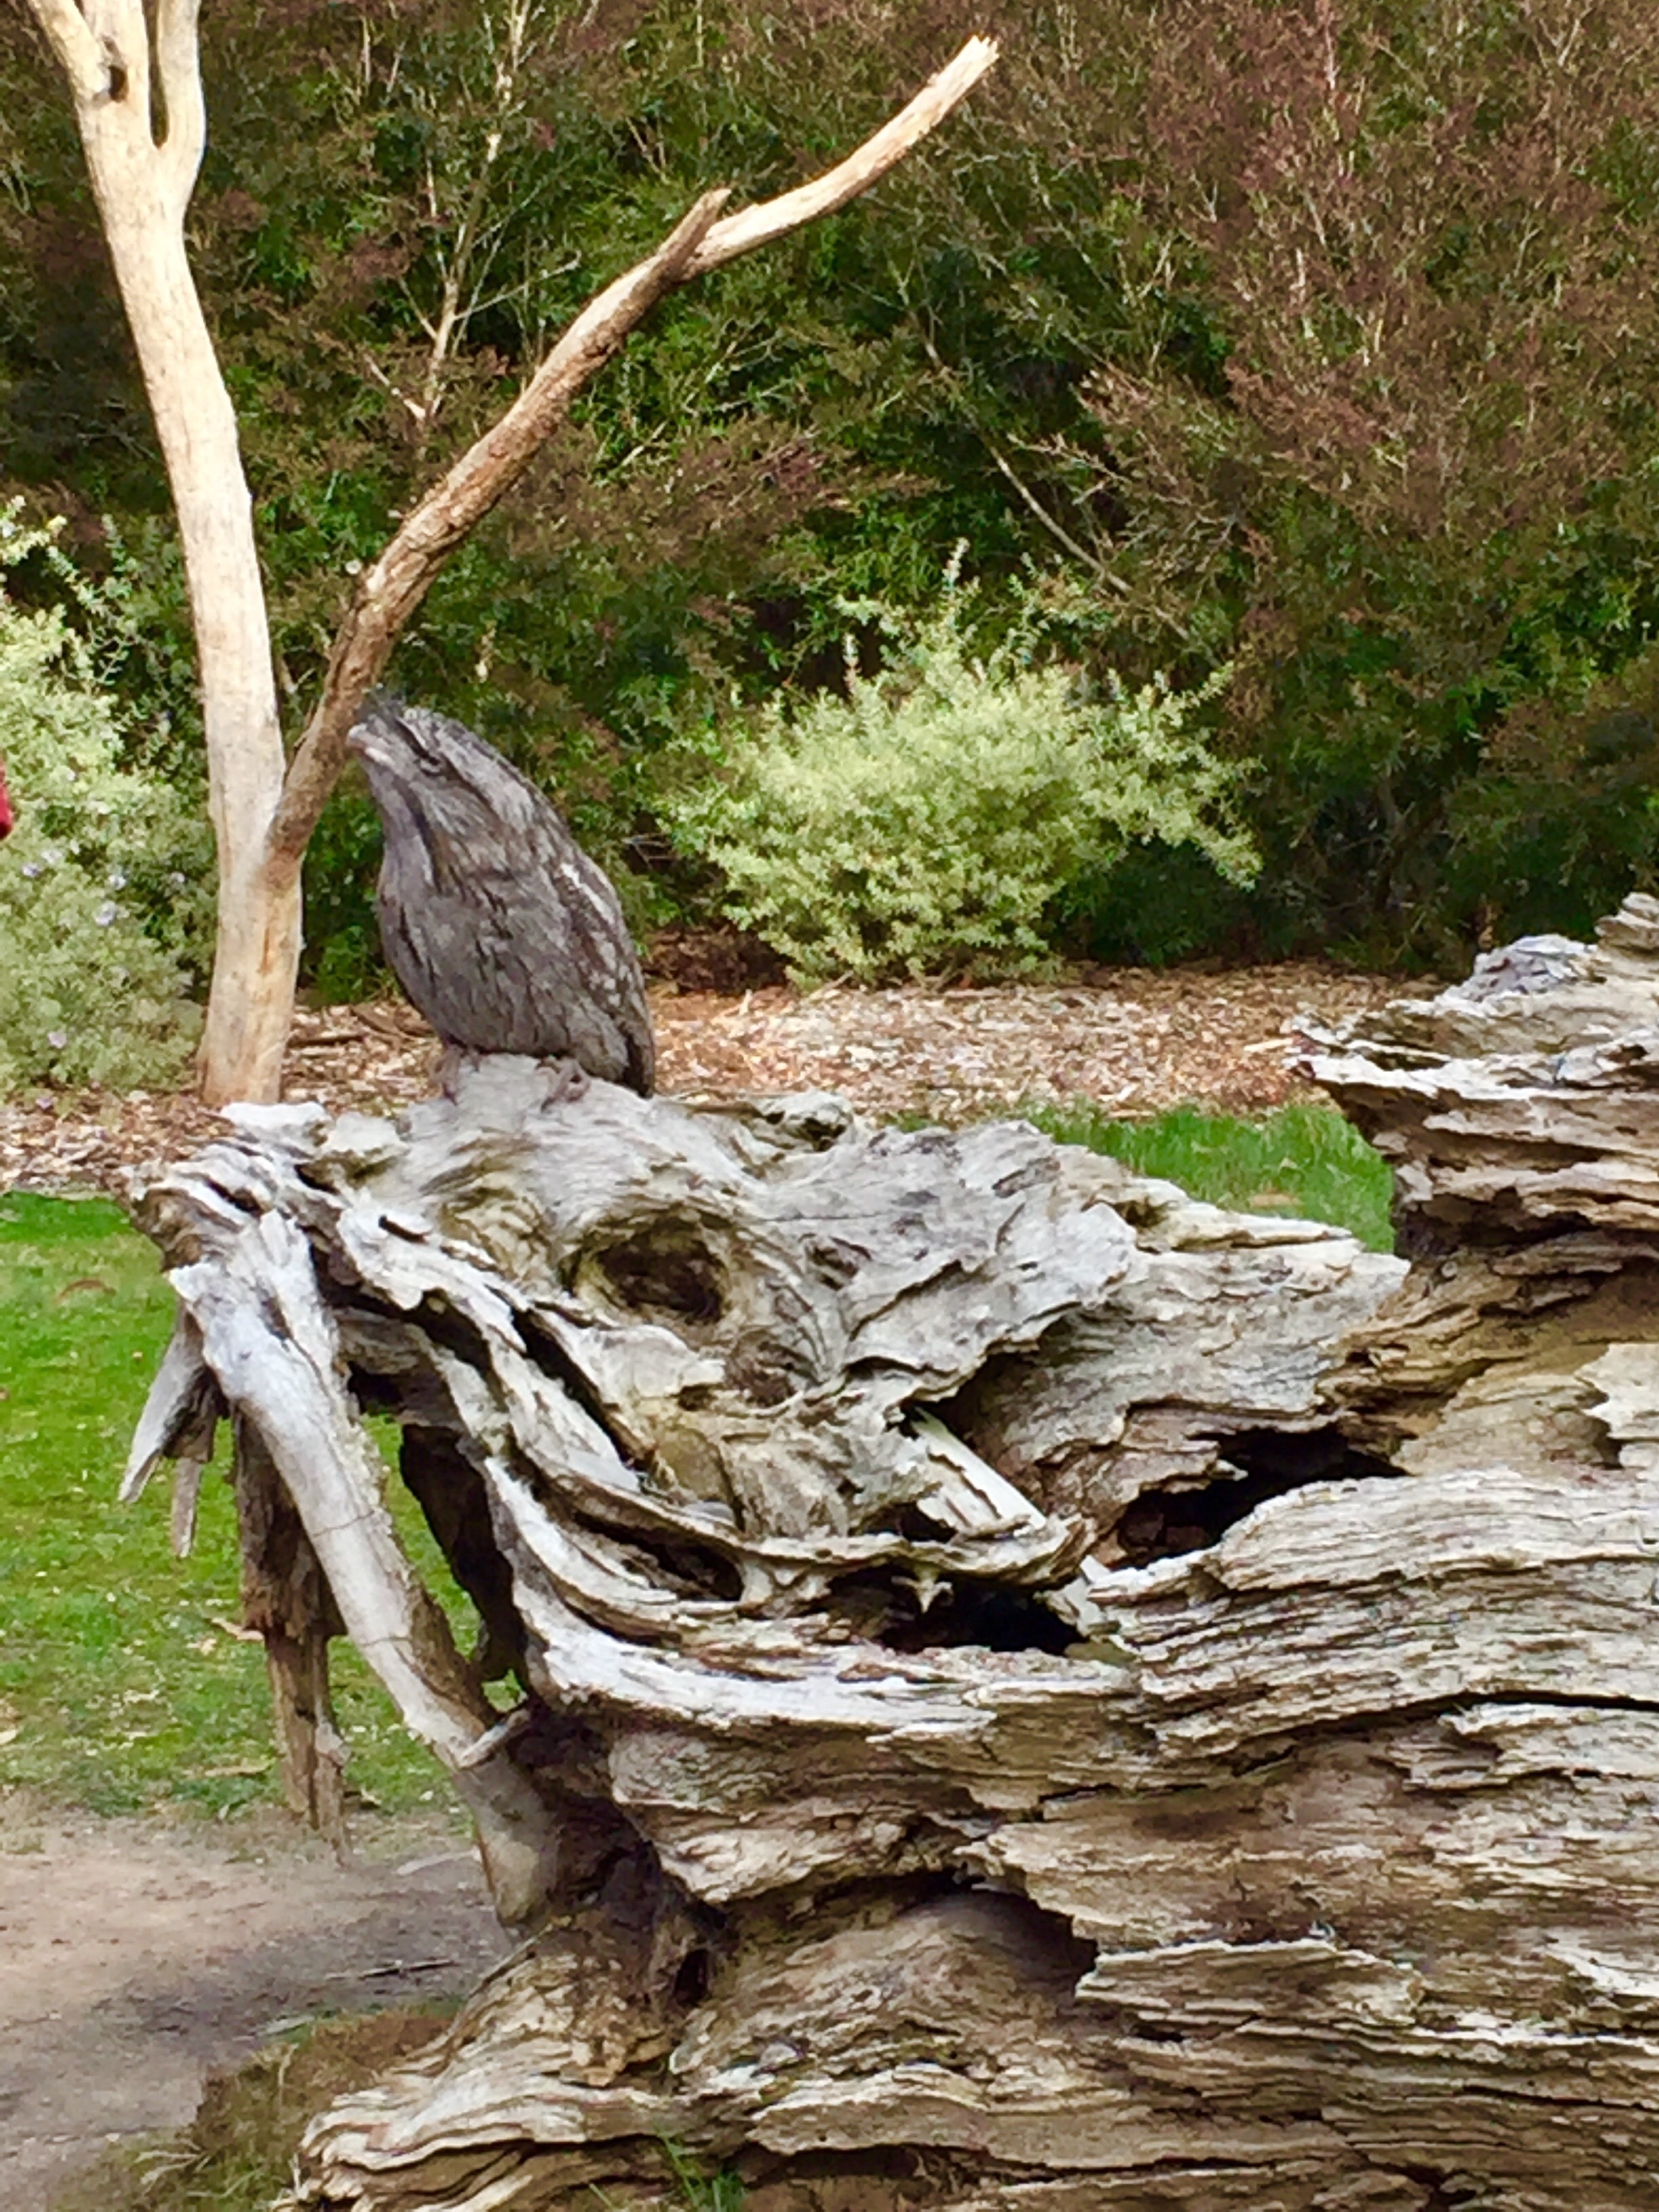 Can you spot me? Owl disguised as tree branch! Lots of fun close encounters with Aussie animals at this sanctuary. Evening tour is full of surprises too!